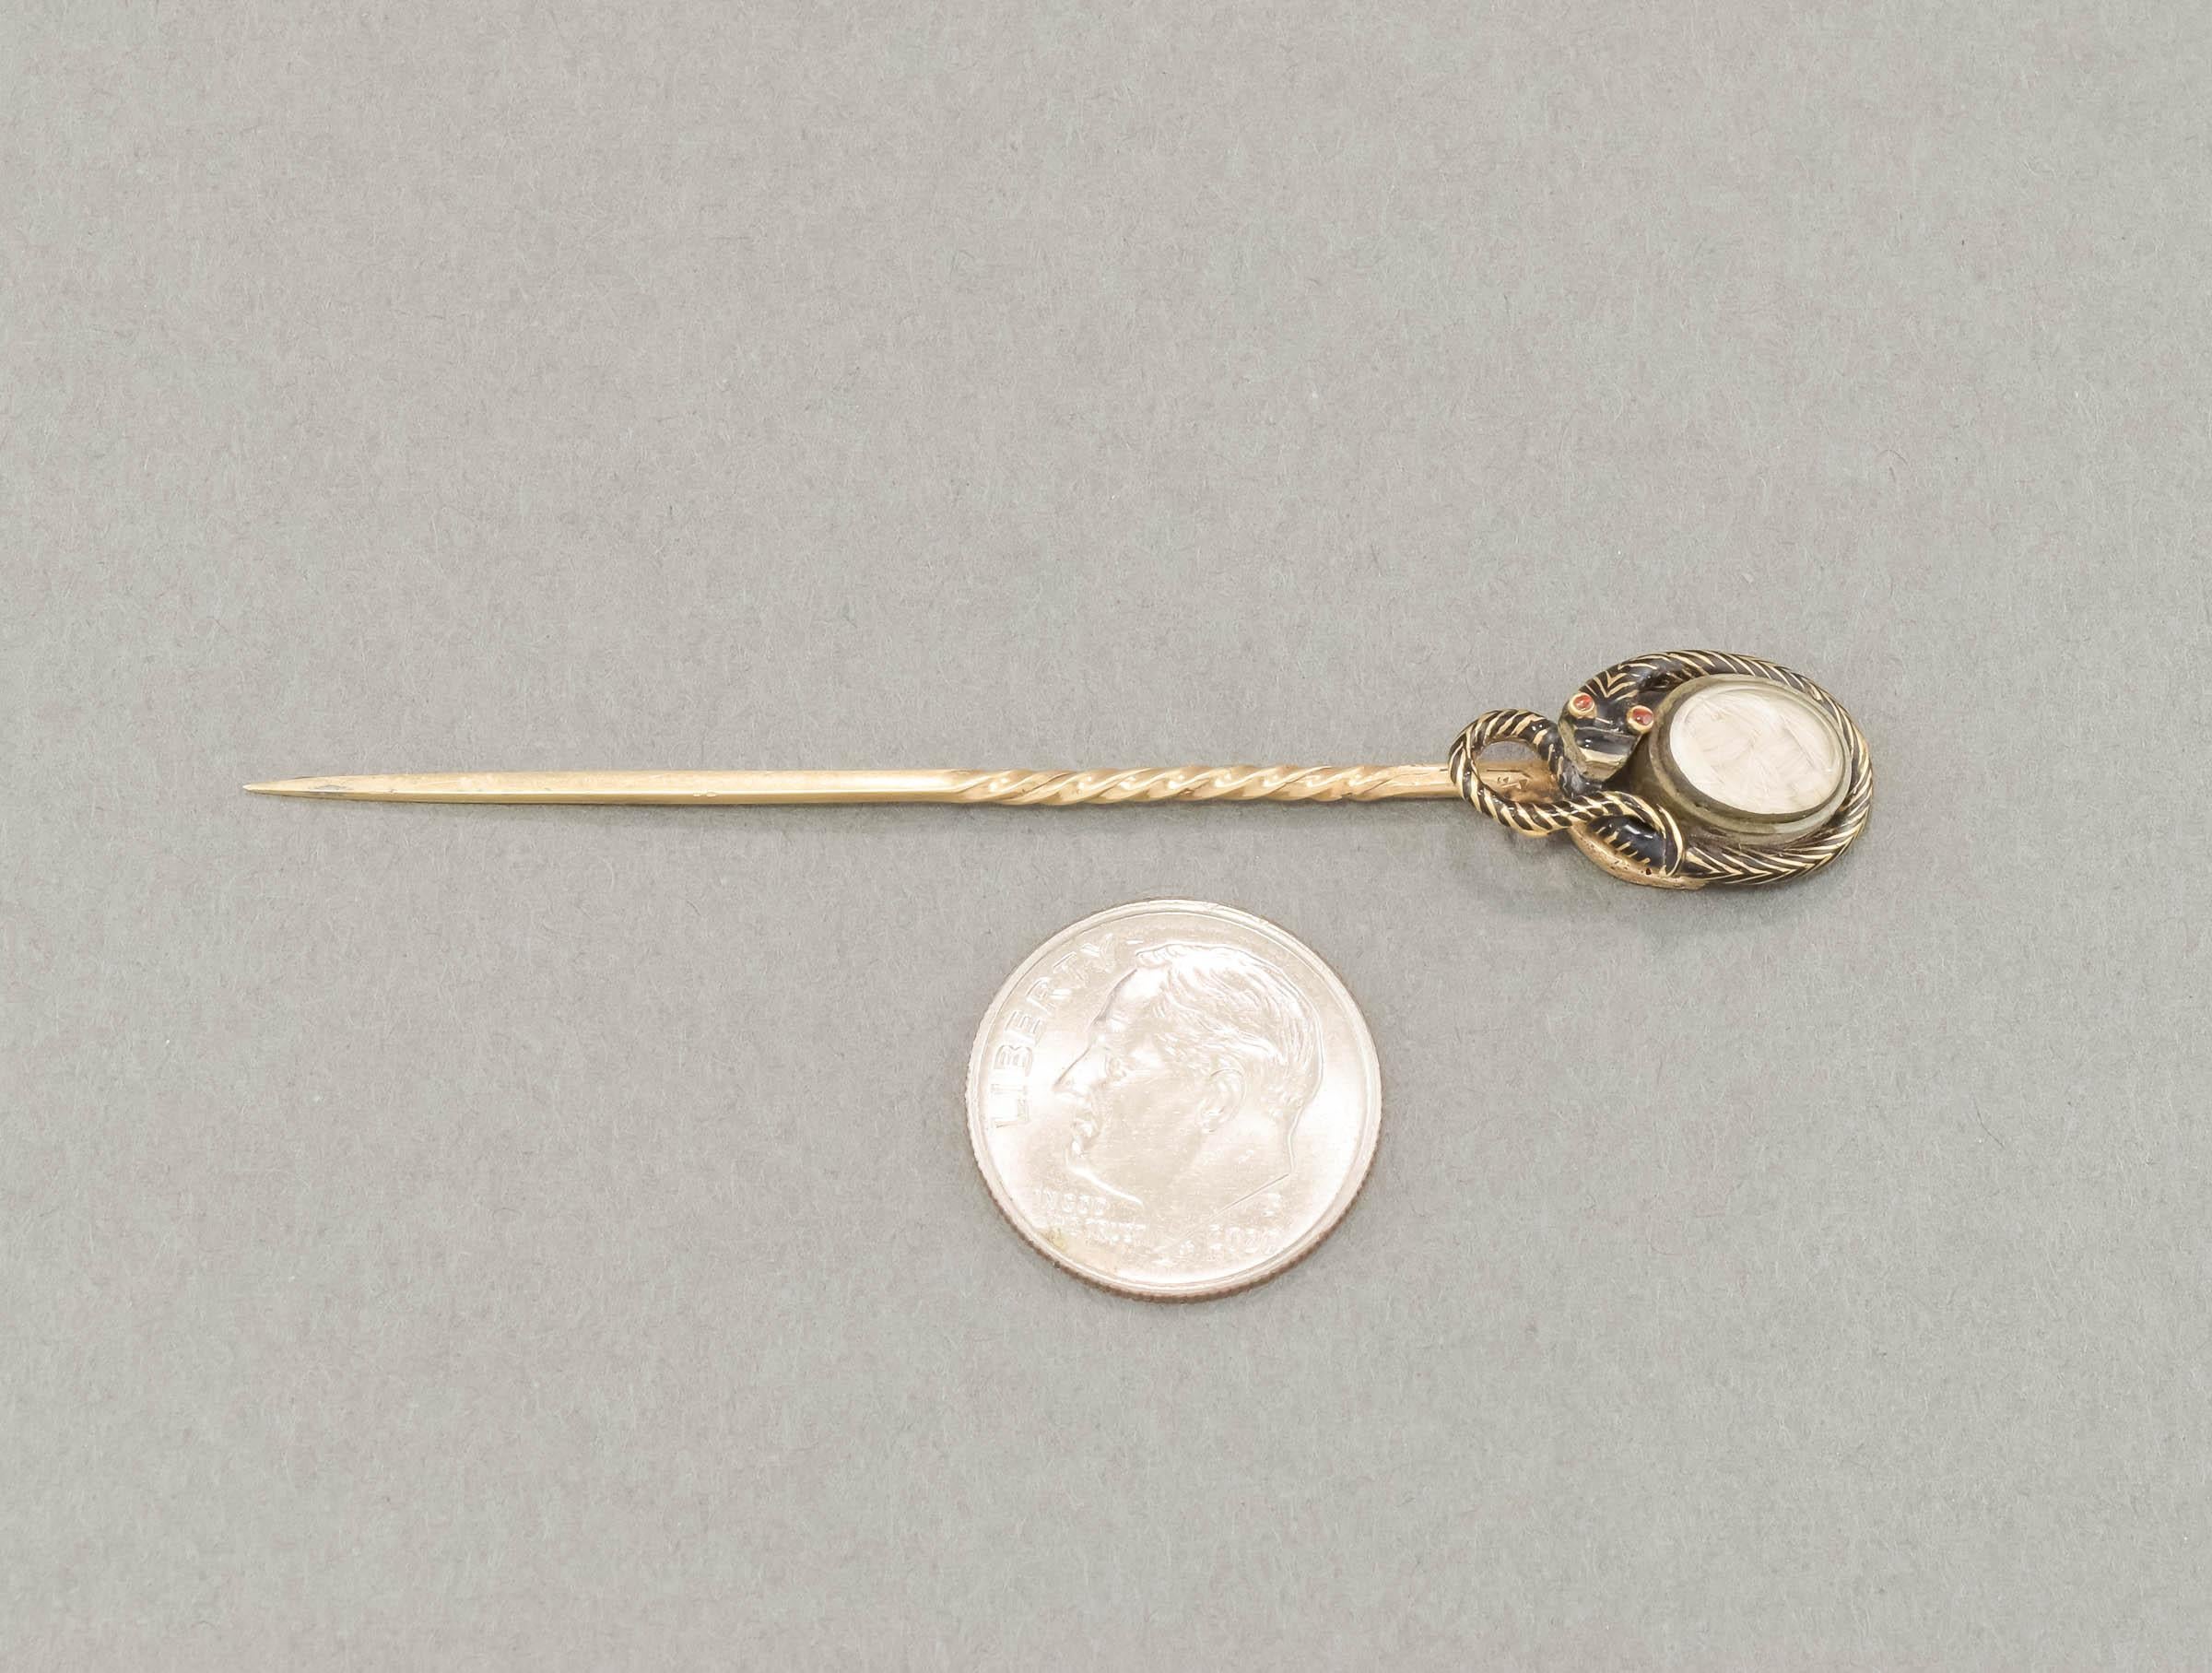 A stunning piece of antique early Victorian Mourning jewelry, this enameled Snake Stickpin is complete with its hair locket and original inscription on the reverse, with date of January 26, 1852.

Crafted of solid 18K gold (the snake) with gold